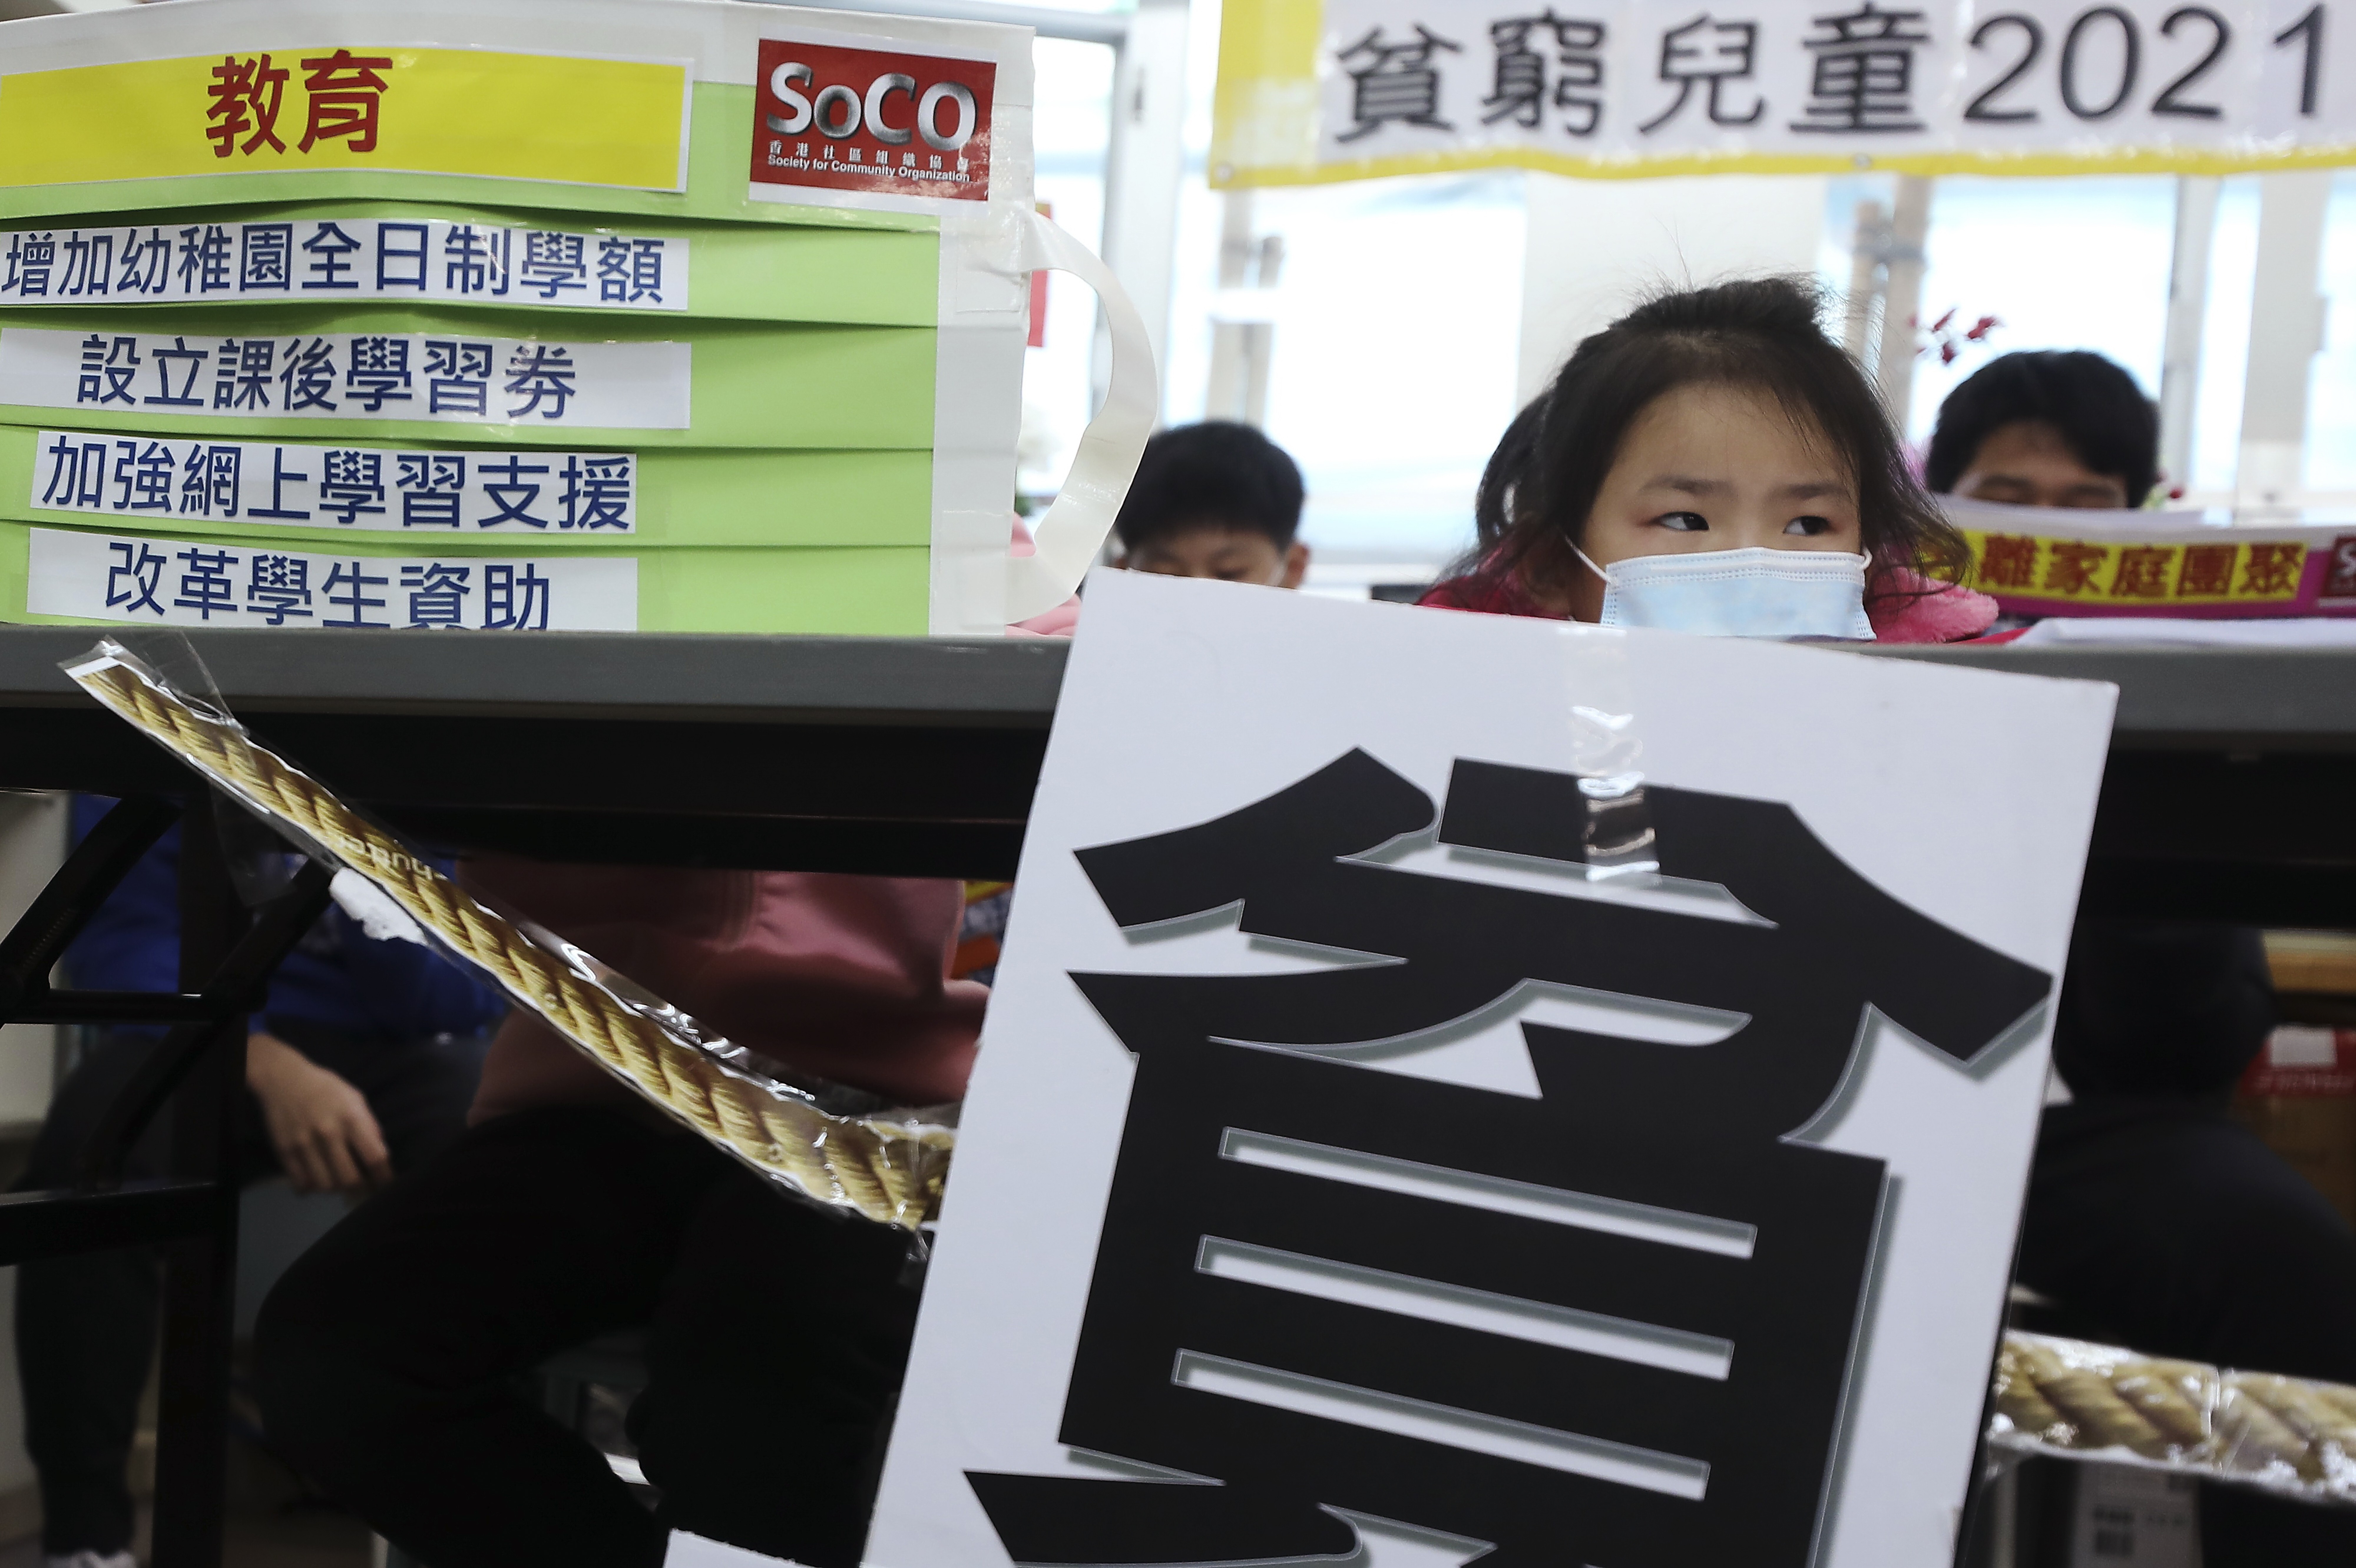 Children’s Rights Association ambassador Chen Shiqing, eight, peers over a table at a press conference announcing the release of the group’s annual report. Photo: Xiaomei Chen